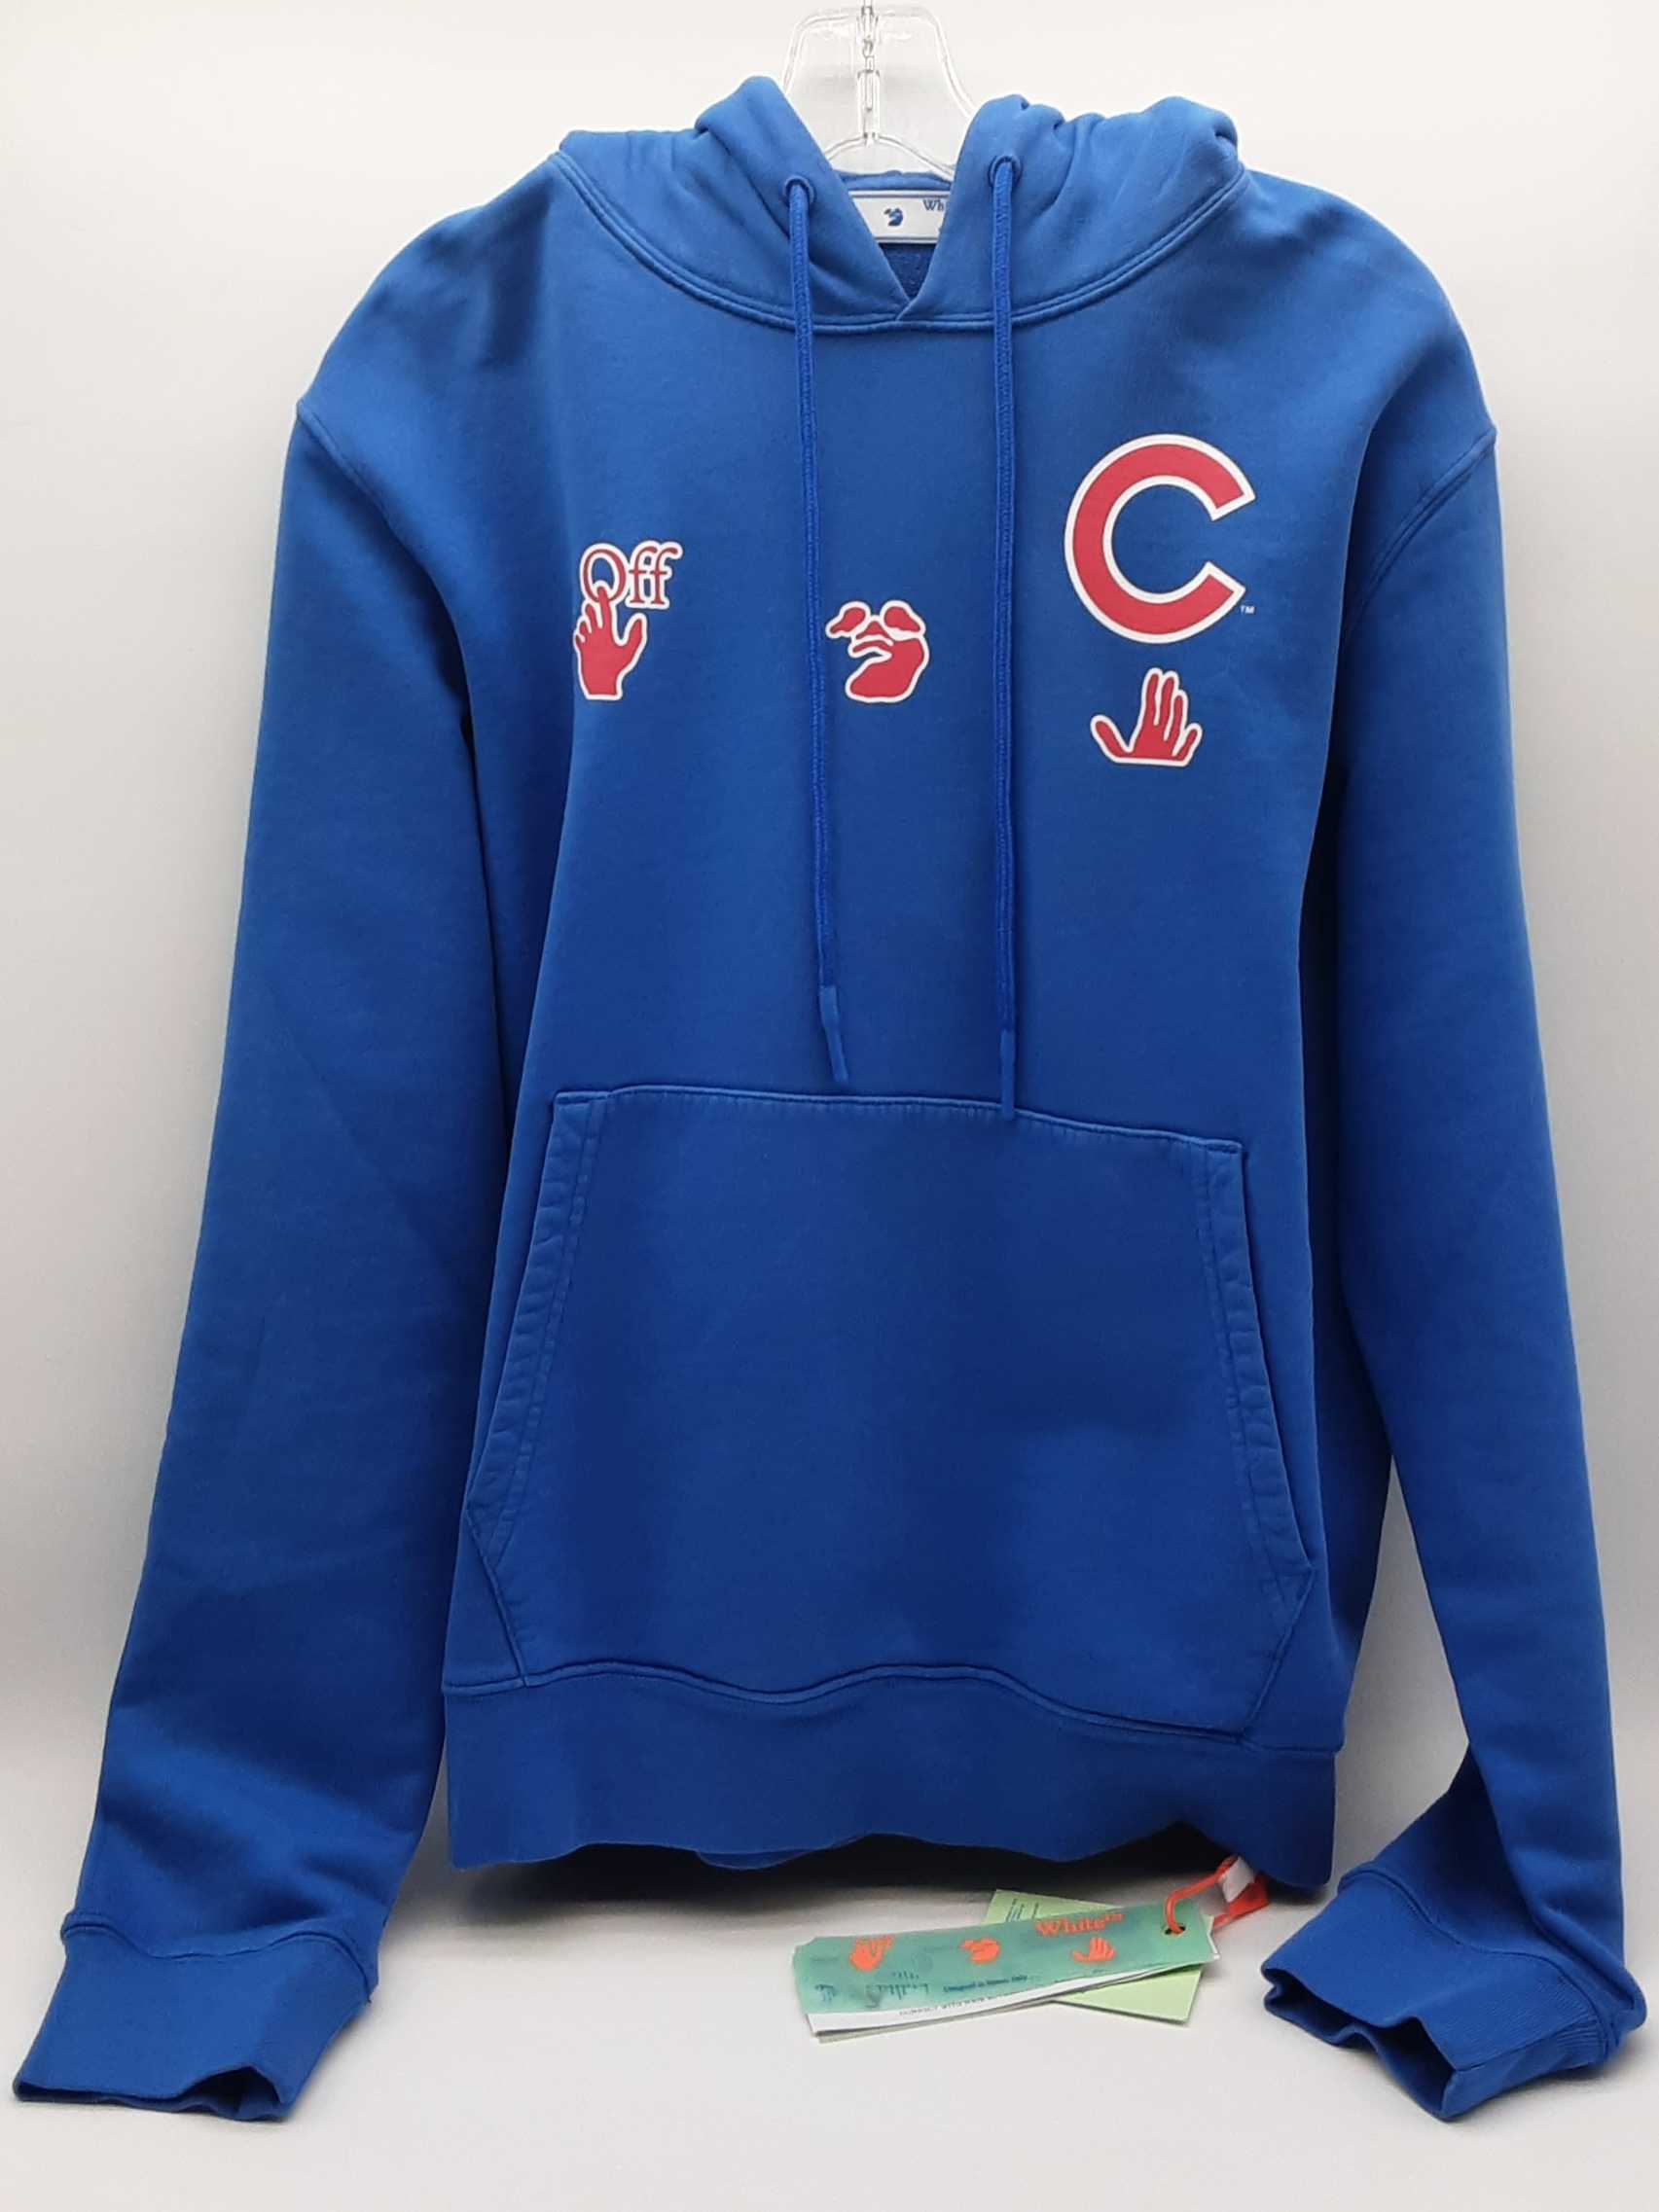 Off White X Mlb Chicago Cubs Virgil Abloh Blue Sweater Size L 144010010629